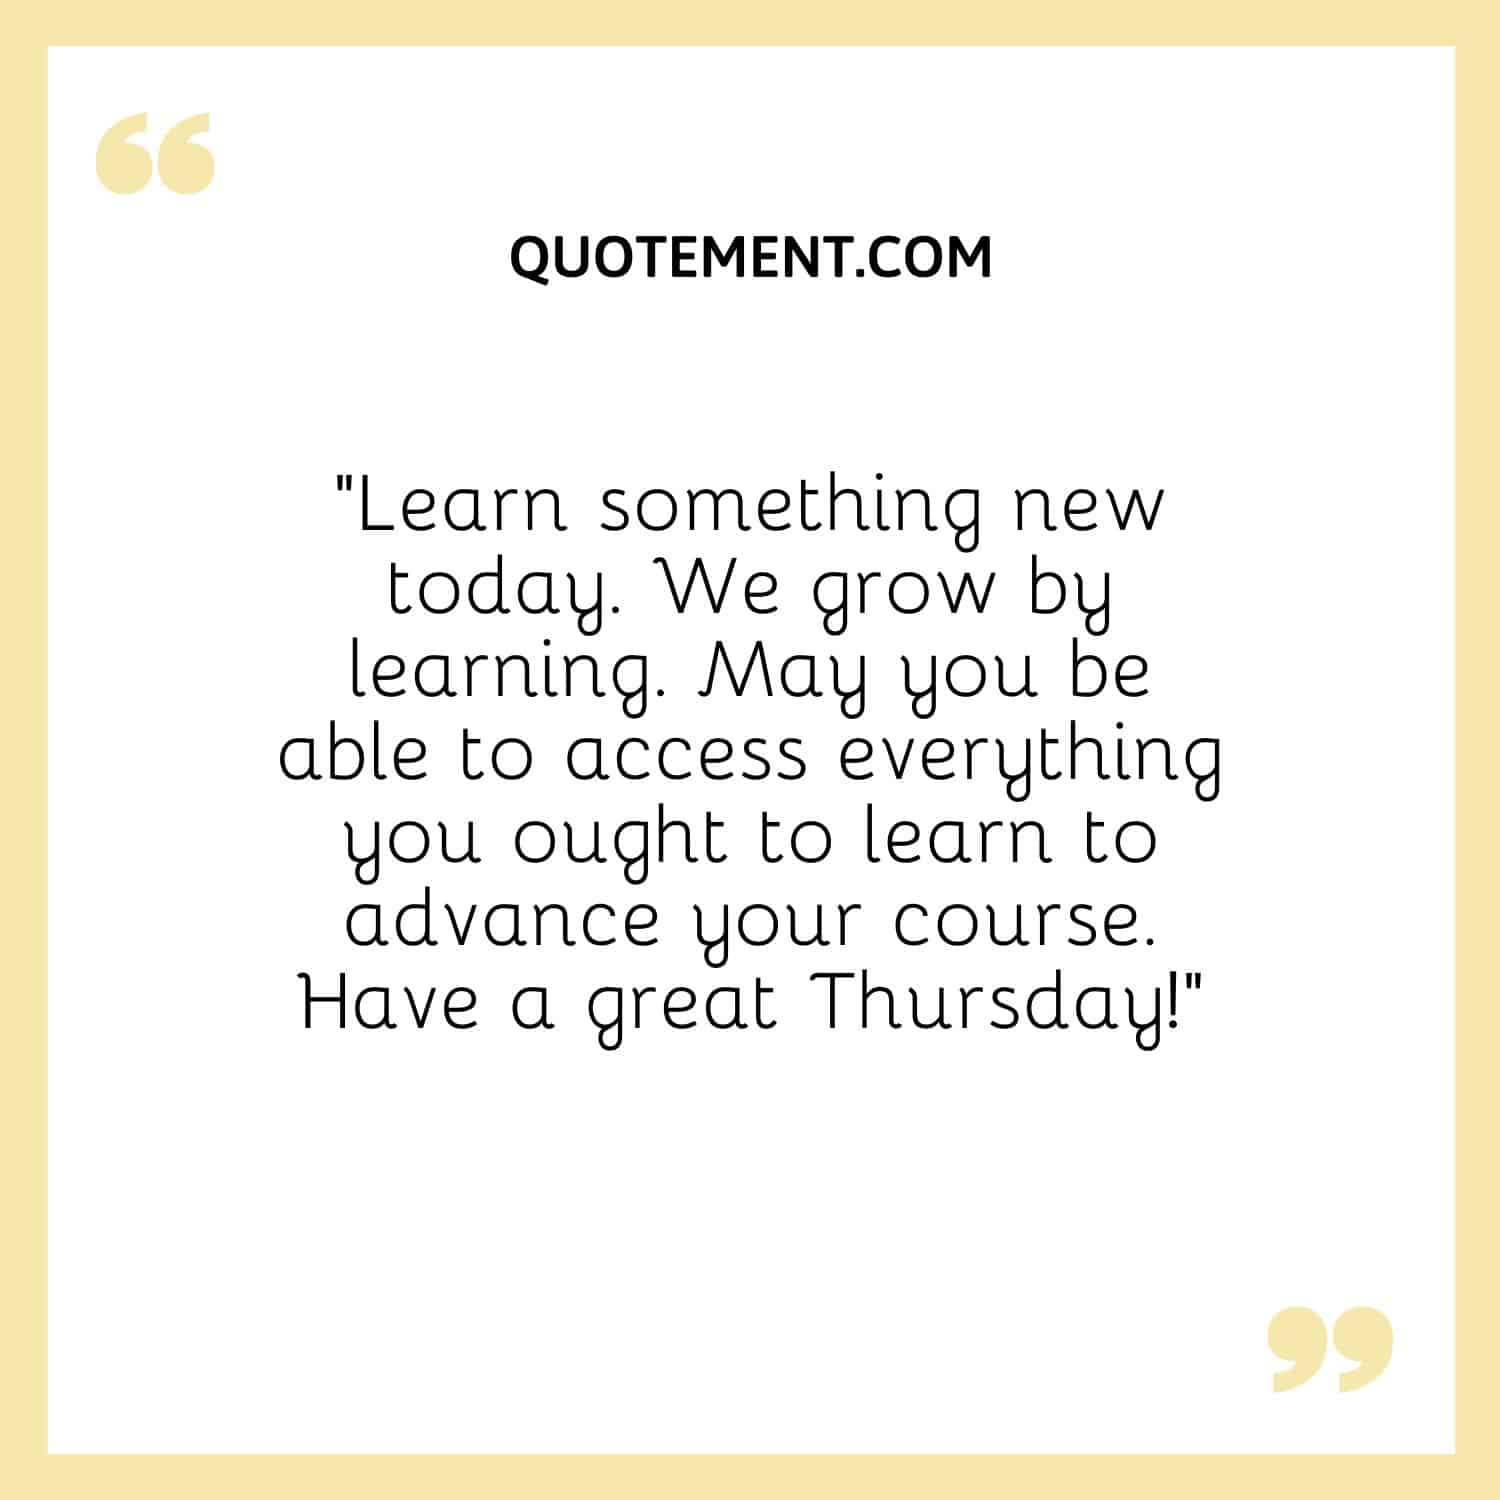 “Learn something new today. We grow by learning. May you be able to access everything you ought to learn to advance your course. Have a great Thursday!”